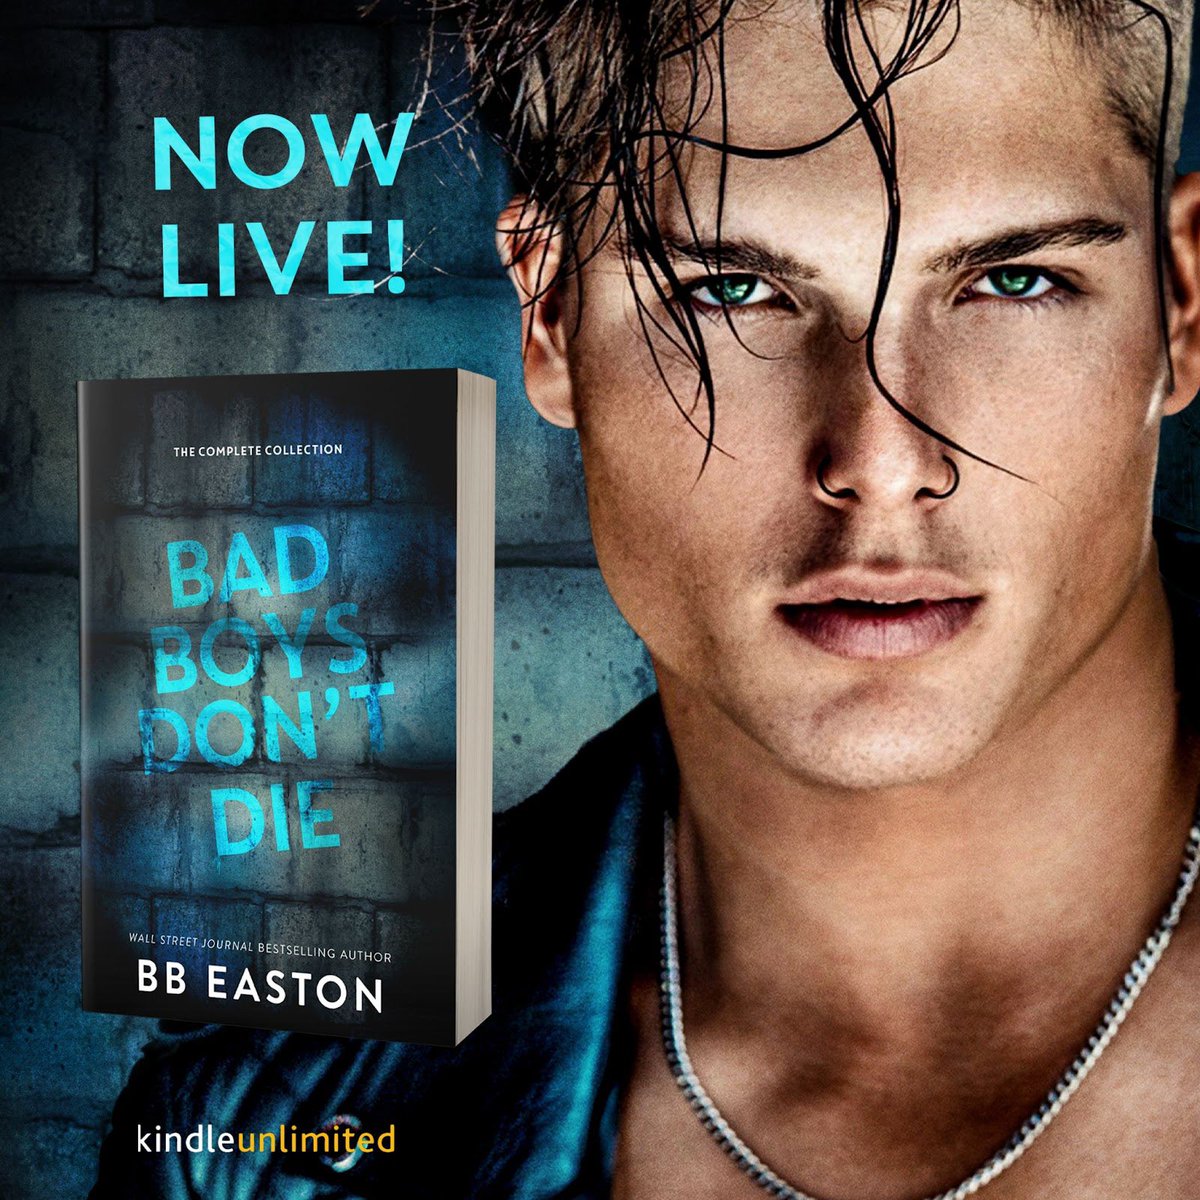 Bad Boys Don't Die: The Complete Collection by @bb_easton is now LIVE!

Download today or read for FREE with #kindleunlimited 
mybook.to/badboysdontdie…

#bbeaston #badboysdontdie CloseProximity #Dystopian #HeroineinDanger #RomanticSuspense #newrelease